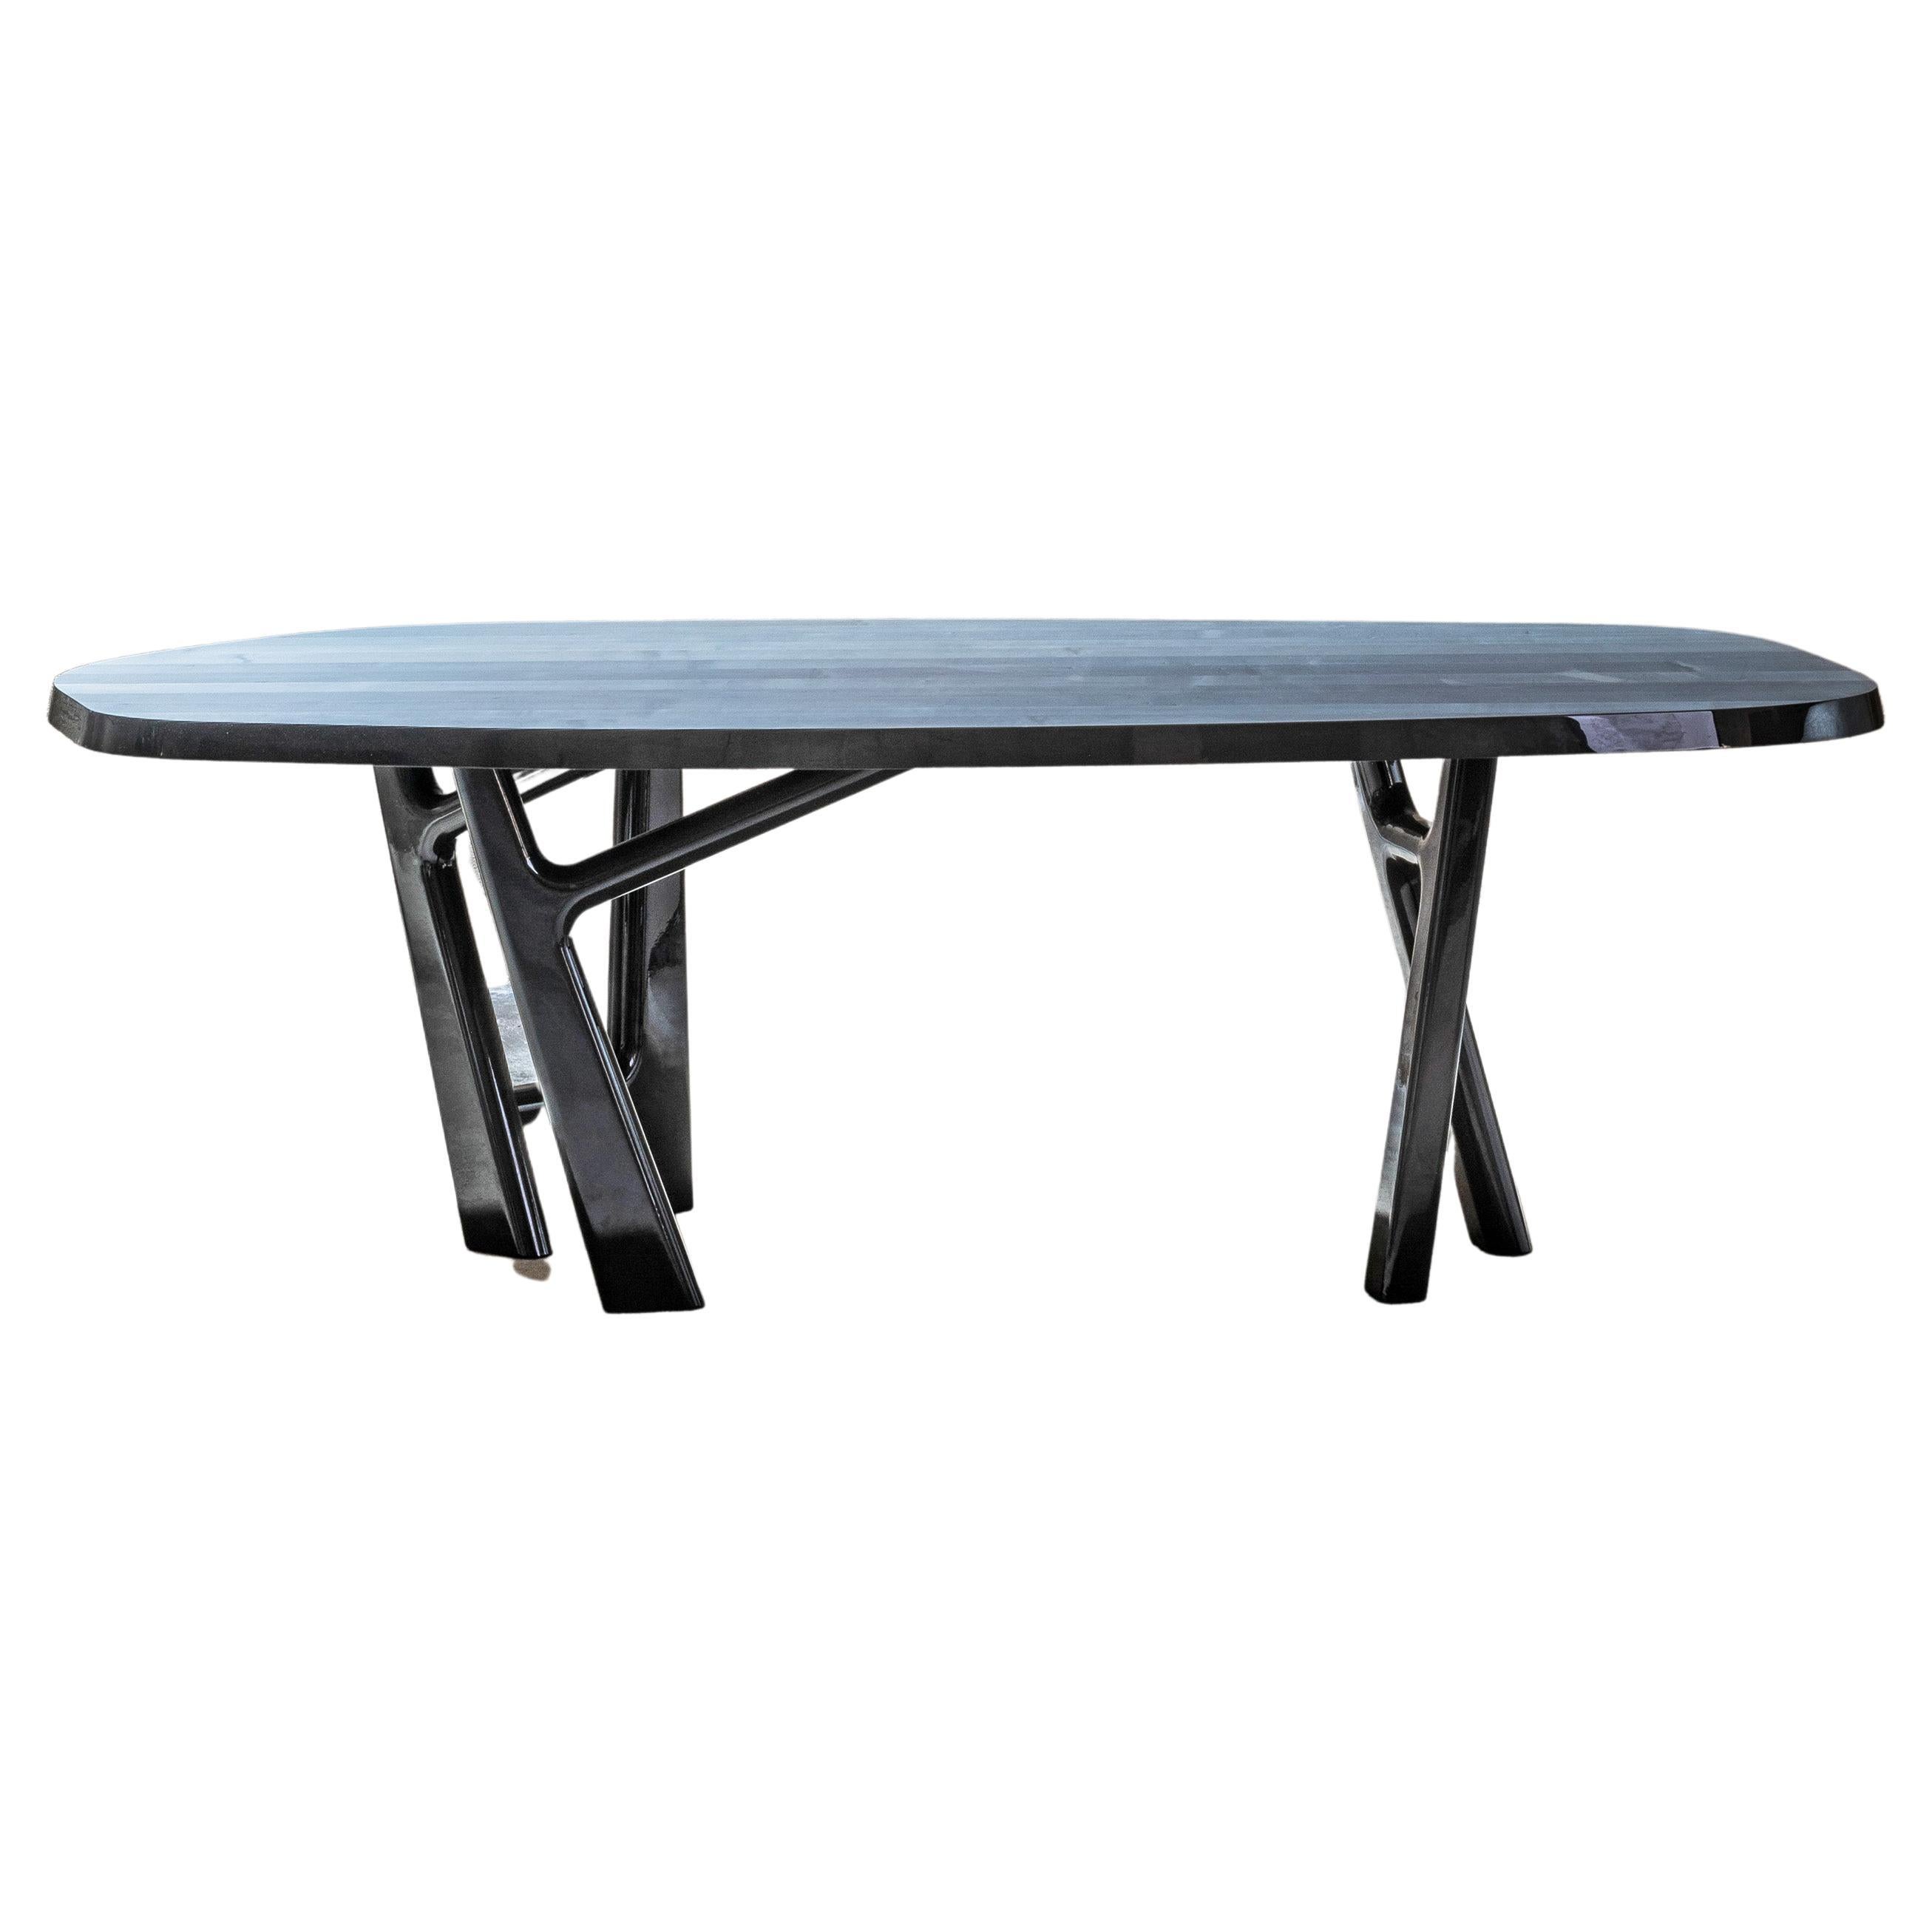 Contemporary Dining Table, YBU Table by Christophe Delcourt